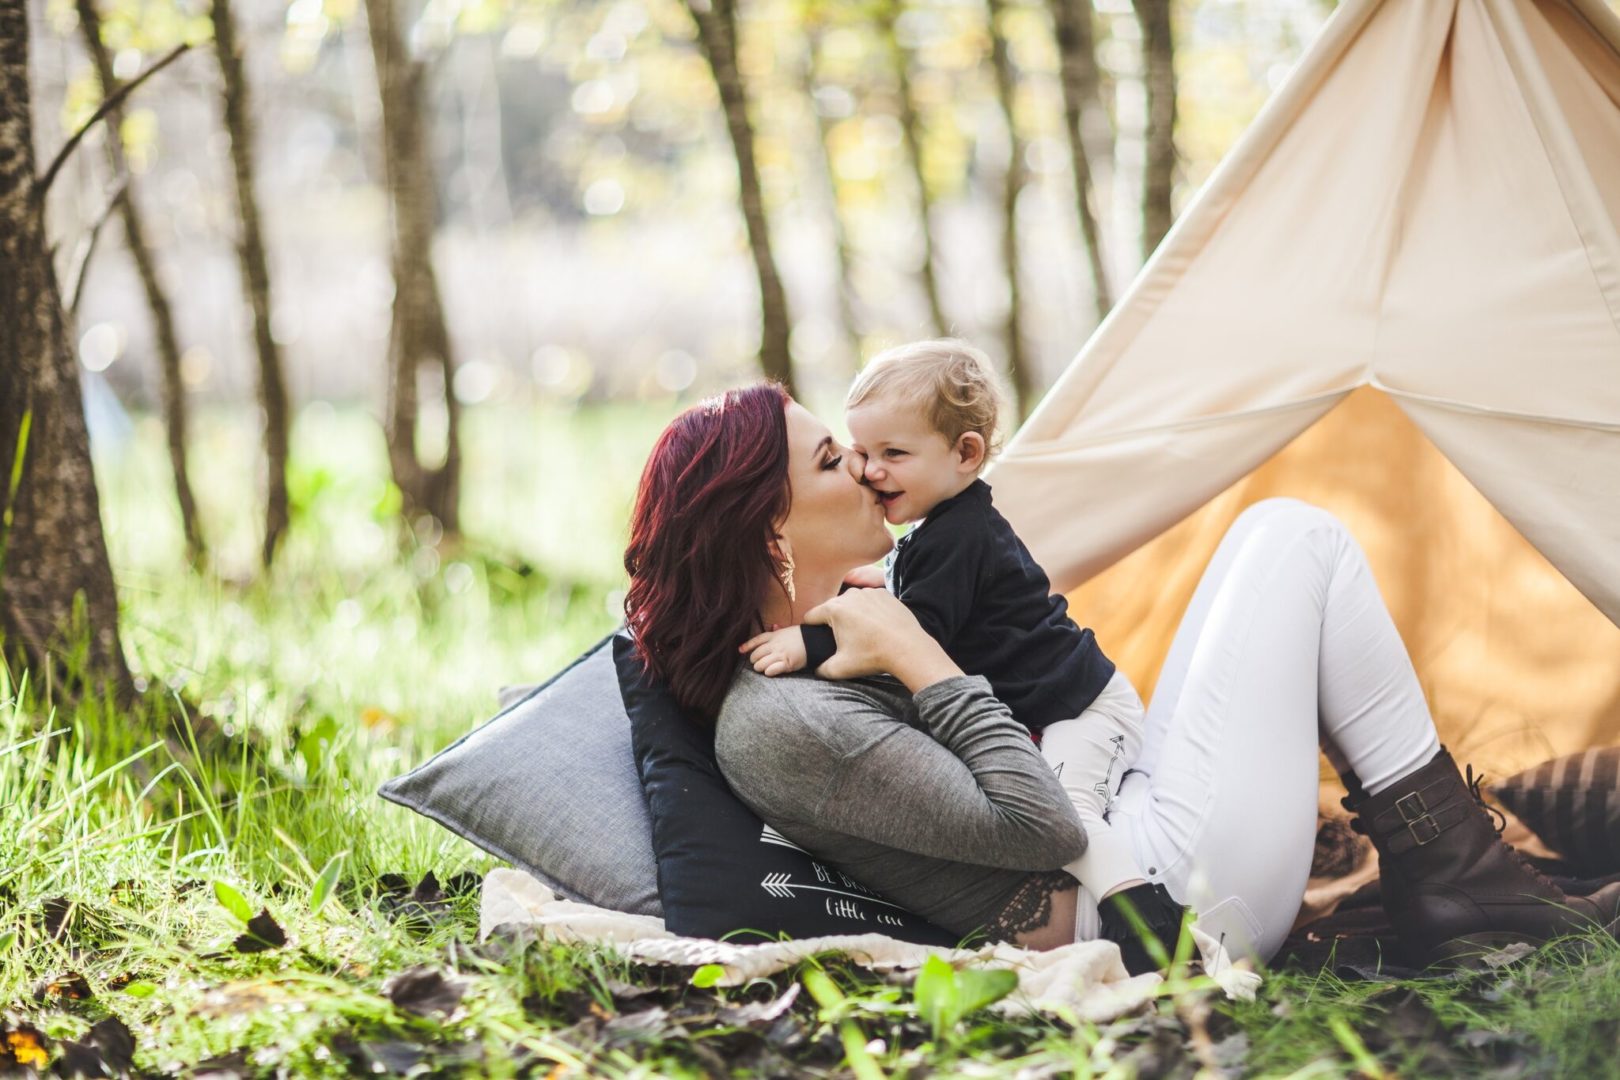 mom baby photoshoot teepee play tent forest